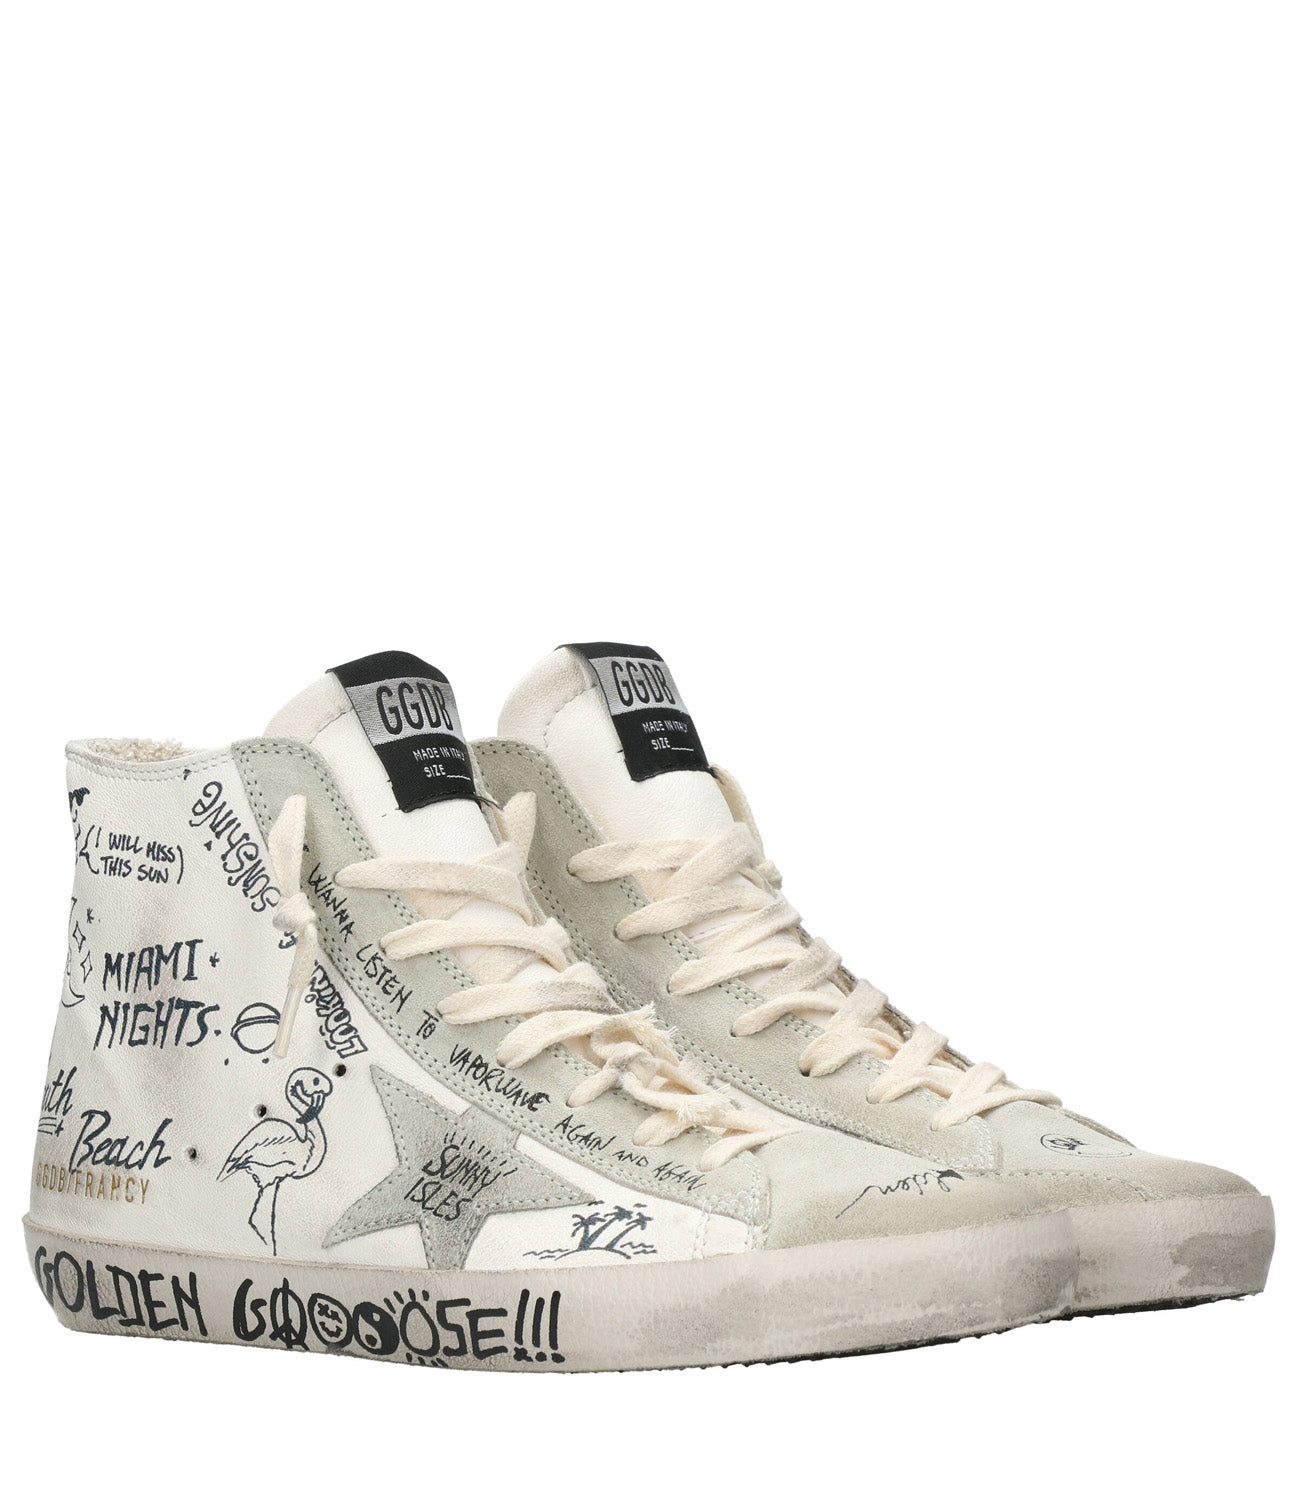 Golden Goose | Francy Sneakers White, Ice and Black